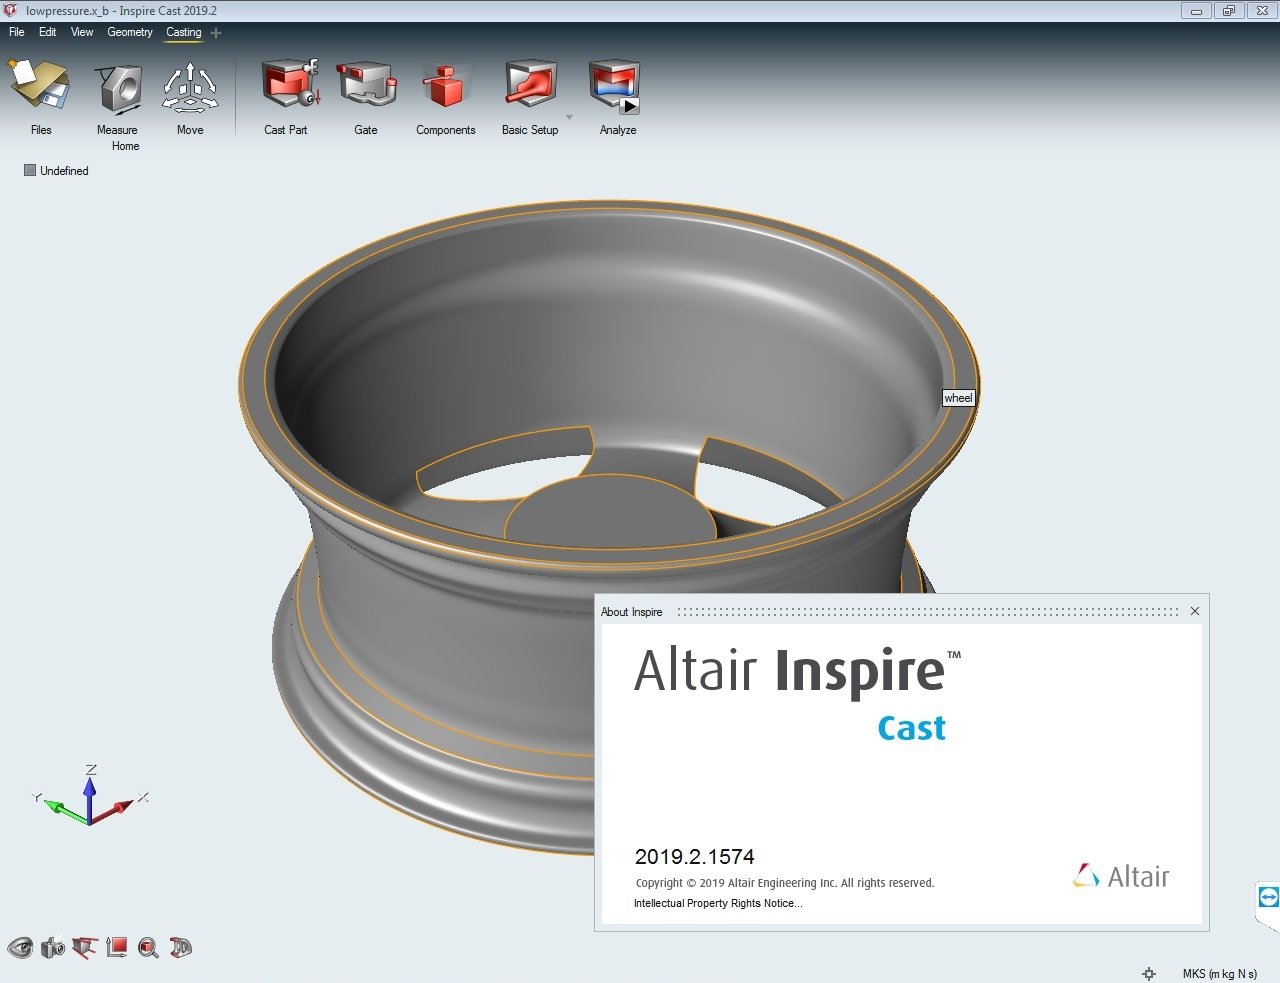 how to install altair inspire 2019.1 inset disc